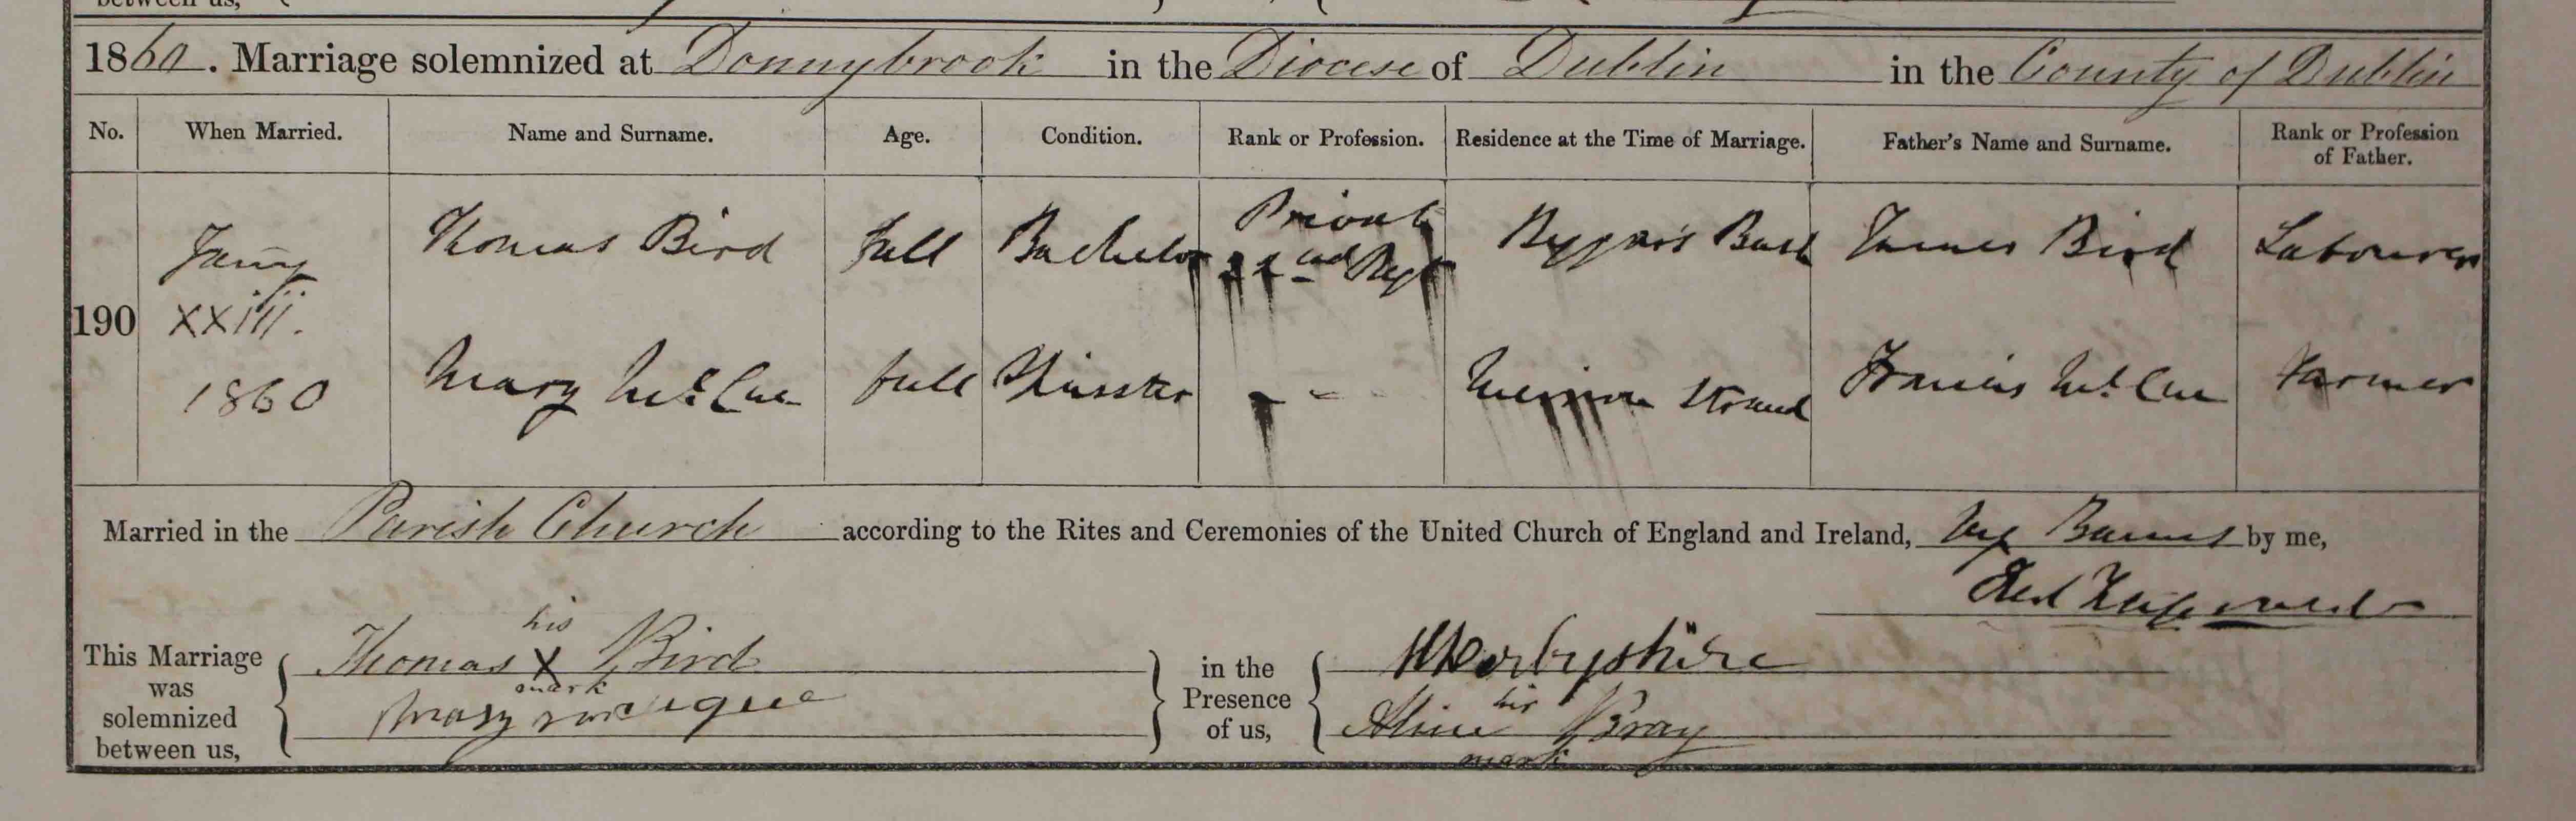 The marriage entry of Thomas Bird and Francis McCague, 23 January 1860, St Mary's Church, Donnybrook, RCB Library P246.2.2.